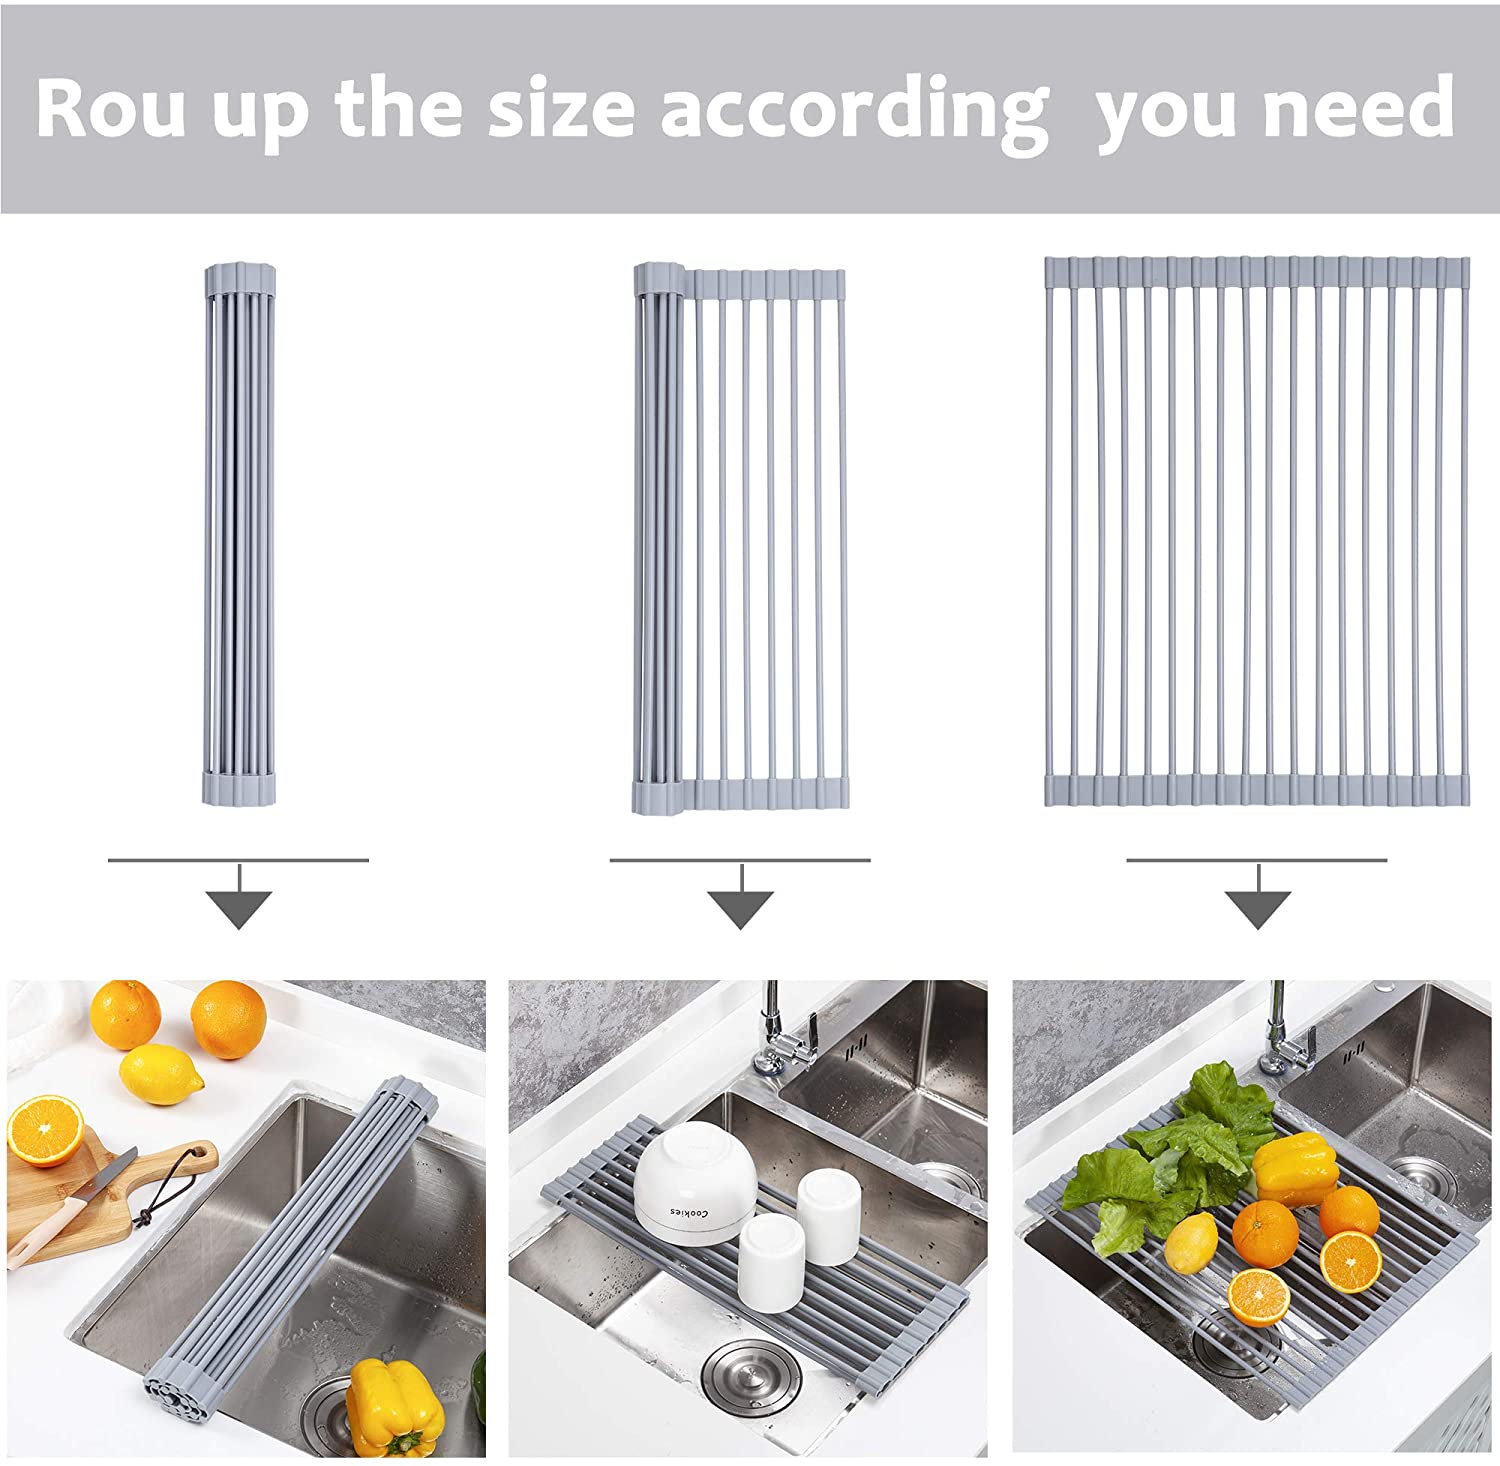  Xgunion Roll-up Dish Drying Rack Over Sink (17.8 x 11.8) 304 Stainless  Steel Foldable Sink Dish Drainer Racks for Kitchen Sink Counter